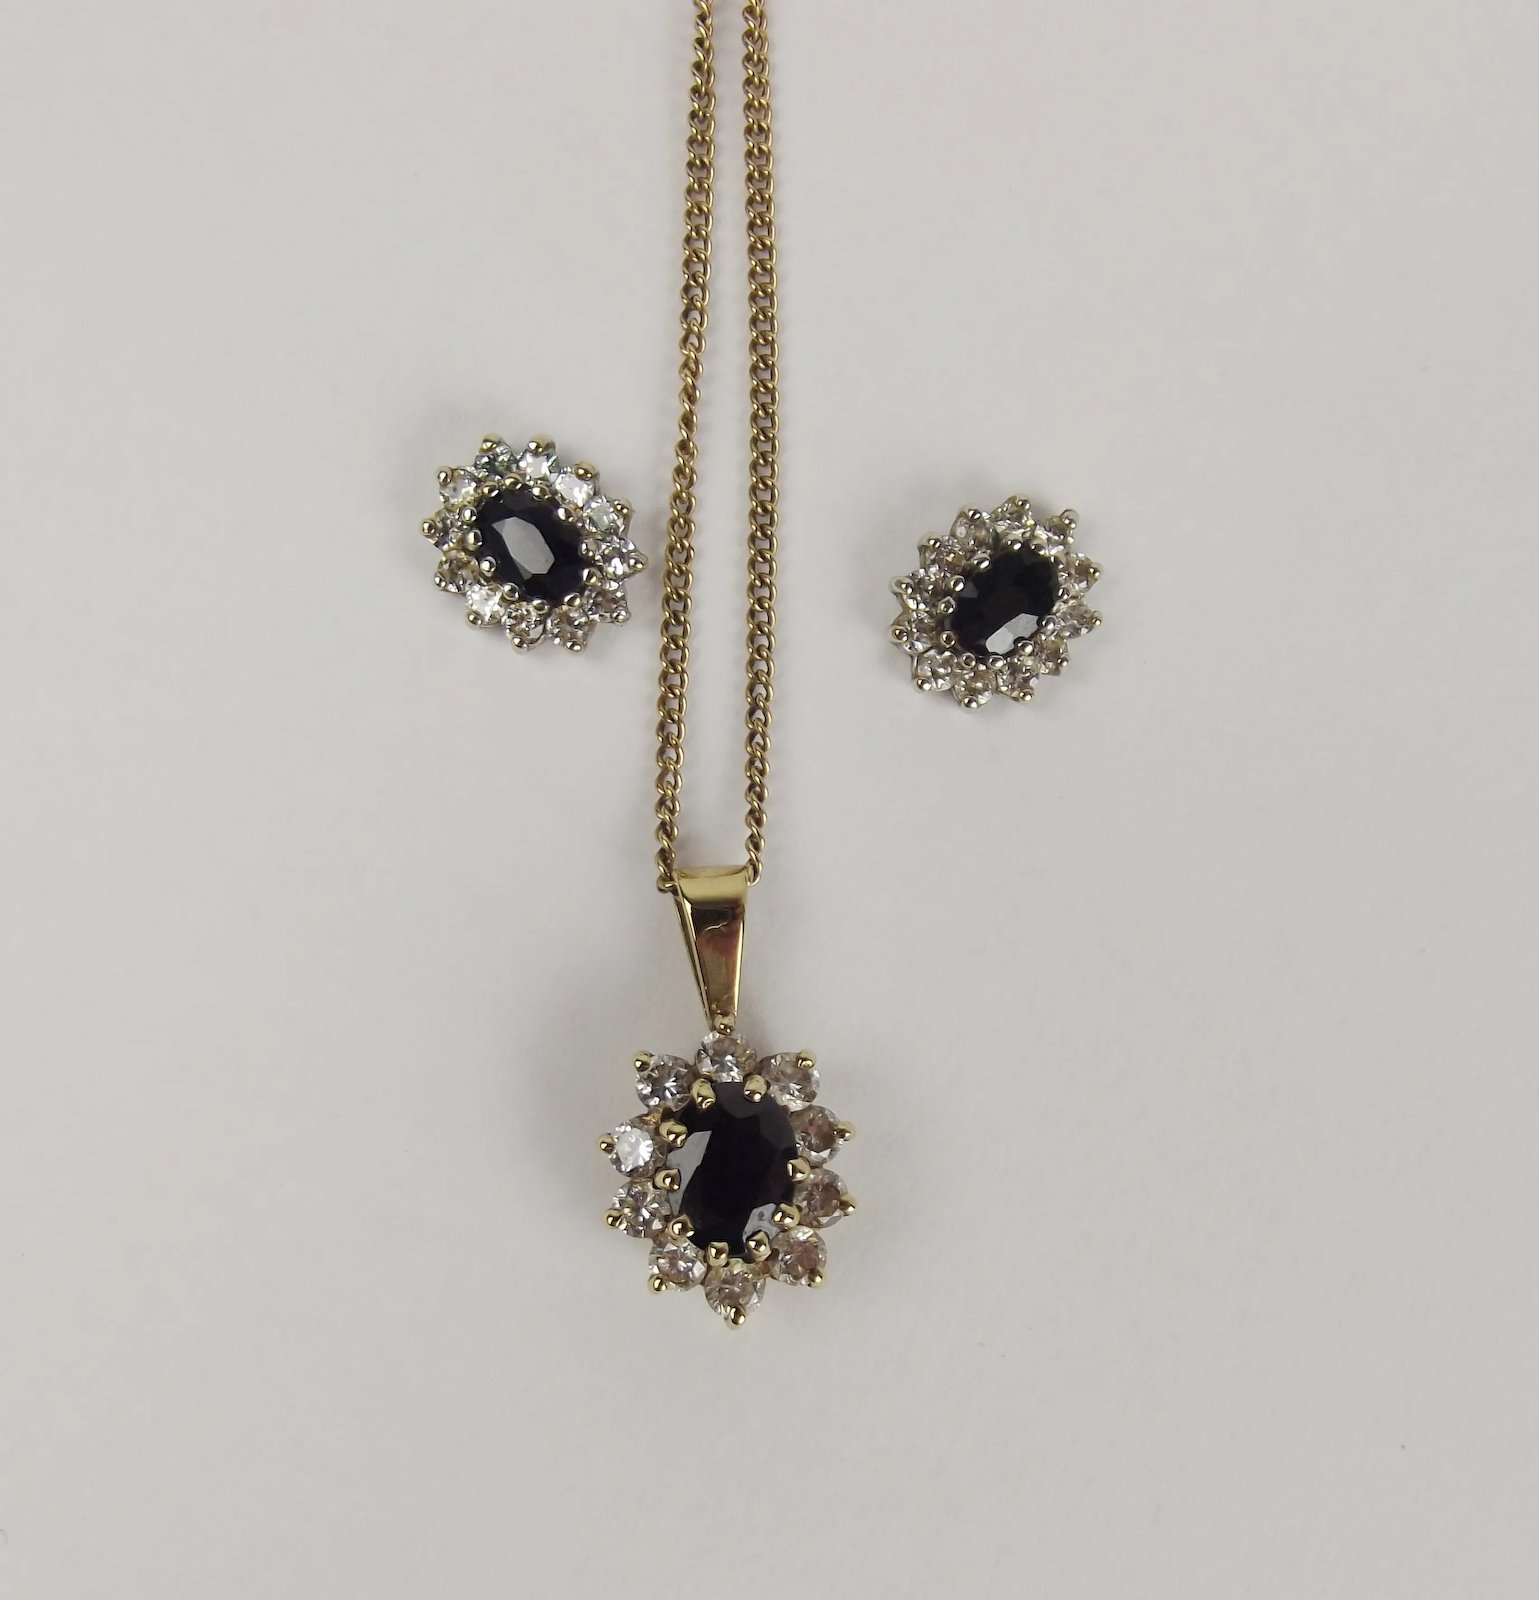 BOXED 9ct Yellow Gold Sapphire Flower Pendant surrounded by cubic zirconias 